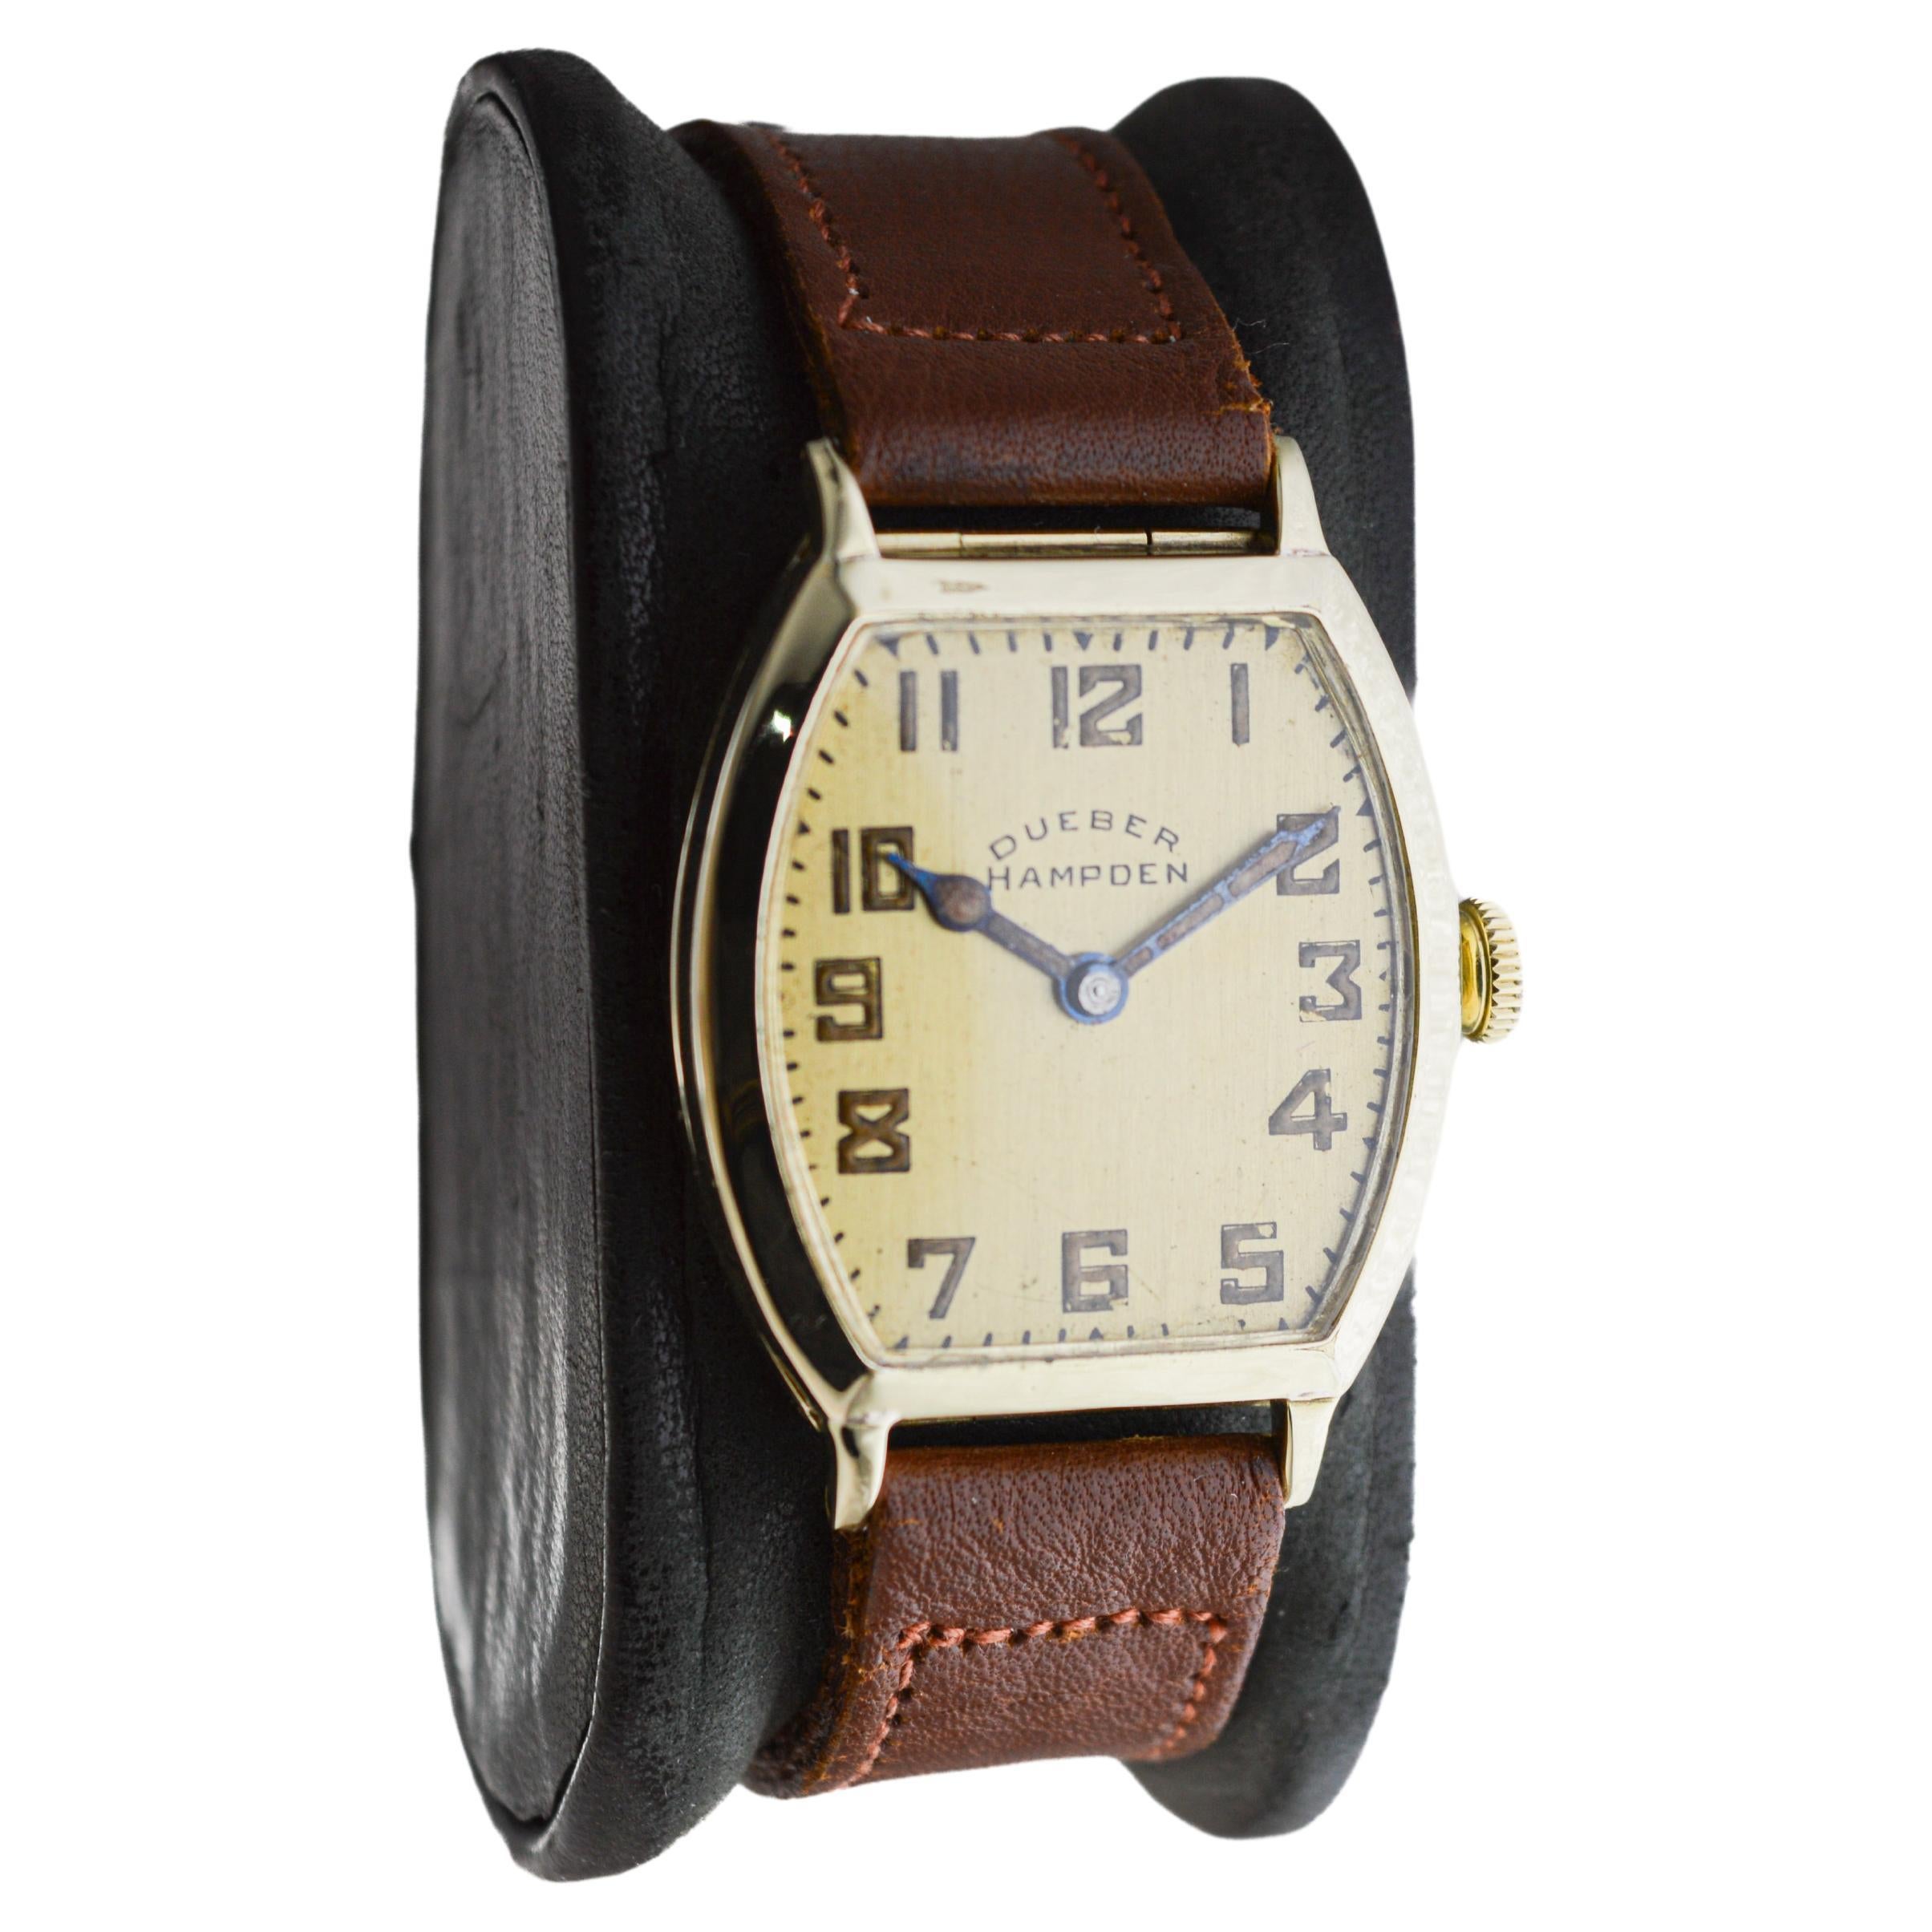 FACTORY / HOUSE: Dueber Hampden Watch Company
STYLE / REFERENCE: Art Deco / Diadem
METAL / MATERIAL: Yellow Gold Filled 
CIRCA / YEAR: 1919
DIMENSIONS / SIZE: Length 39mm X Width 29mm
MOVEMENT / CALIBER: Manual Winding / 17 Jewels / Caliber  4/0